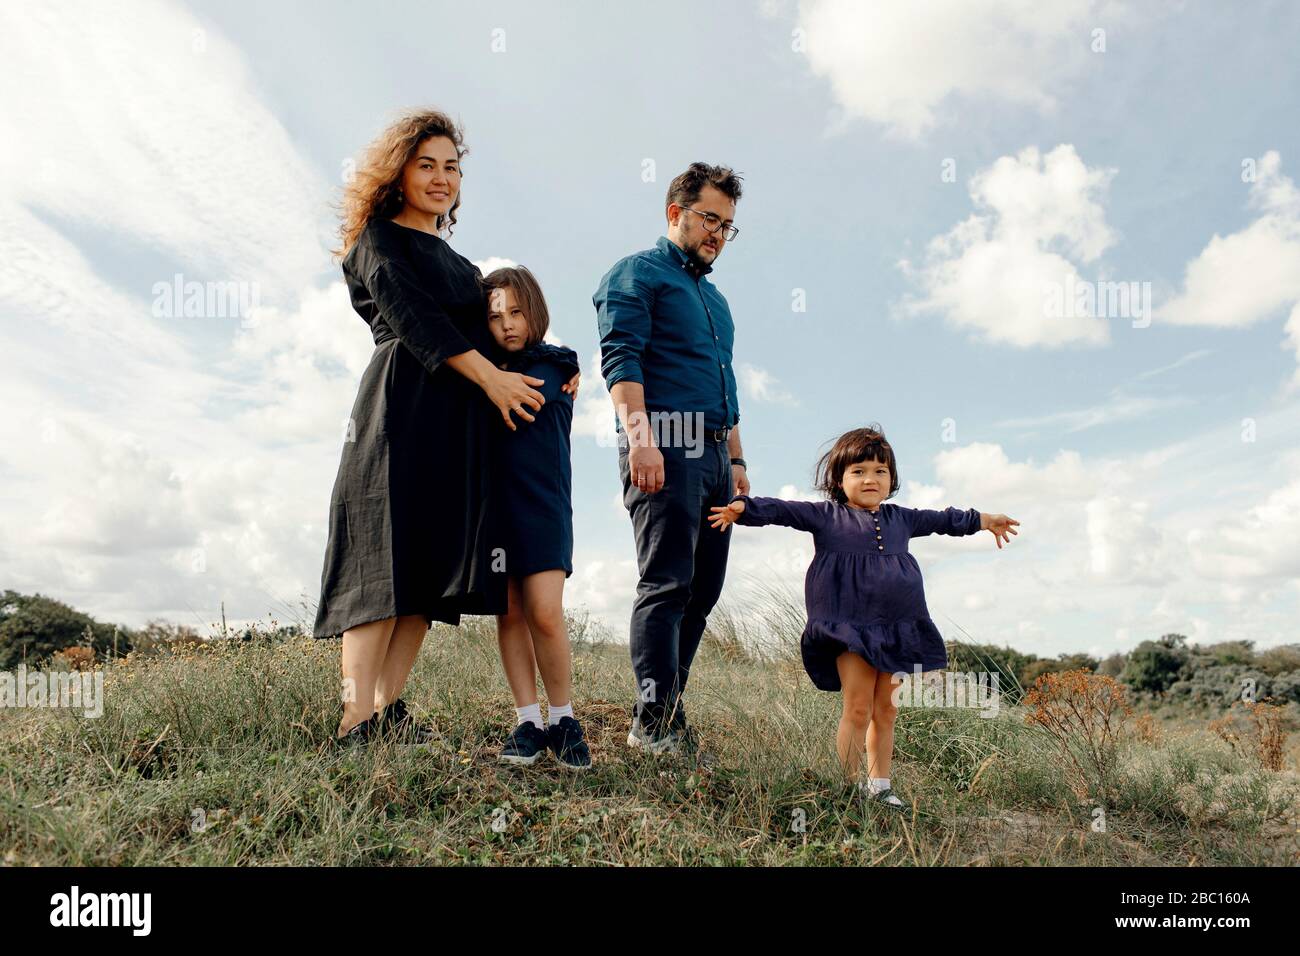 Family with two children spending time together in nature, The Hague, Netherlands Stock Photo